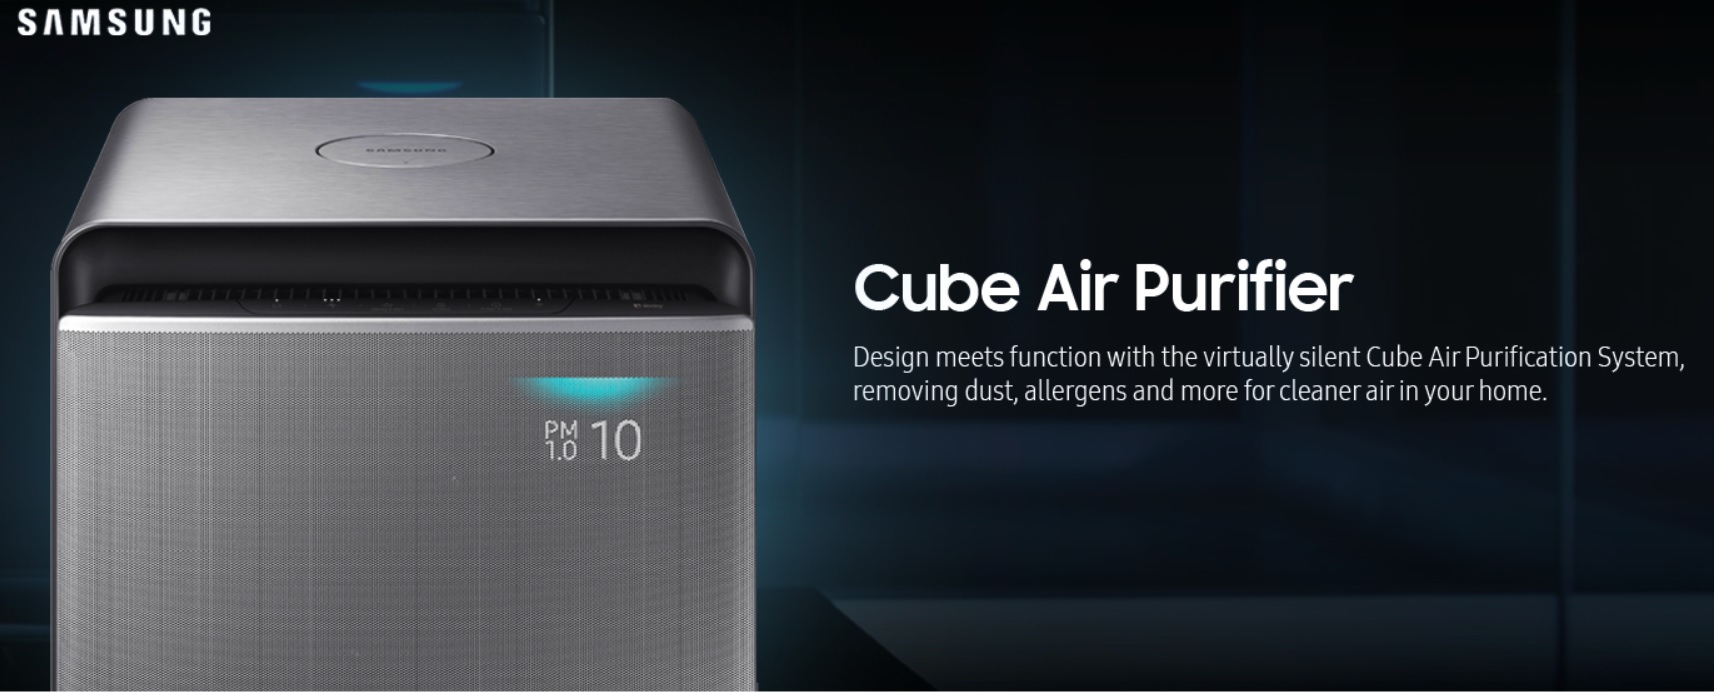 Samsung Cube Air Purifier Featured Image